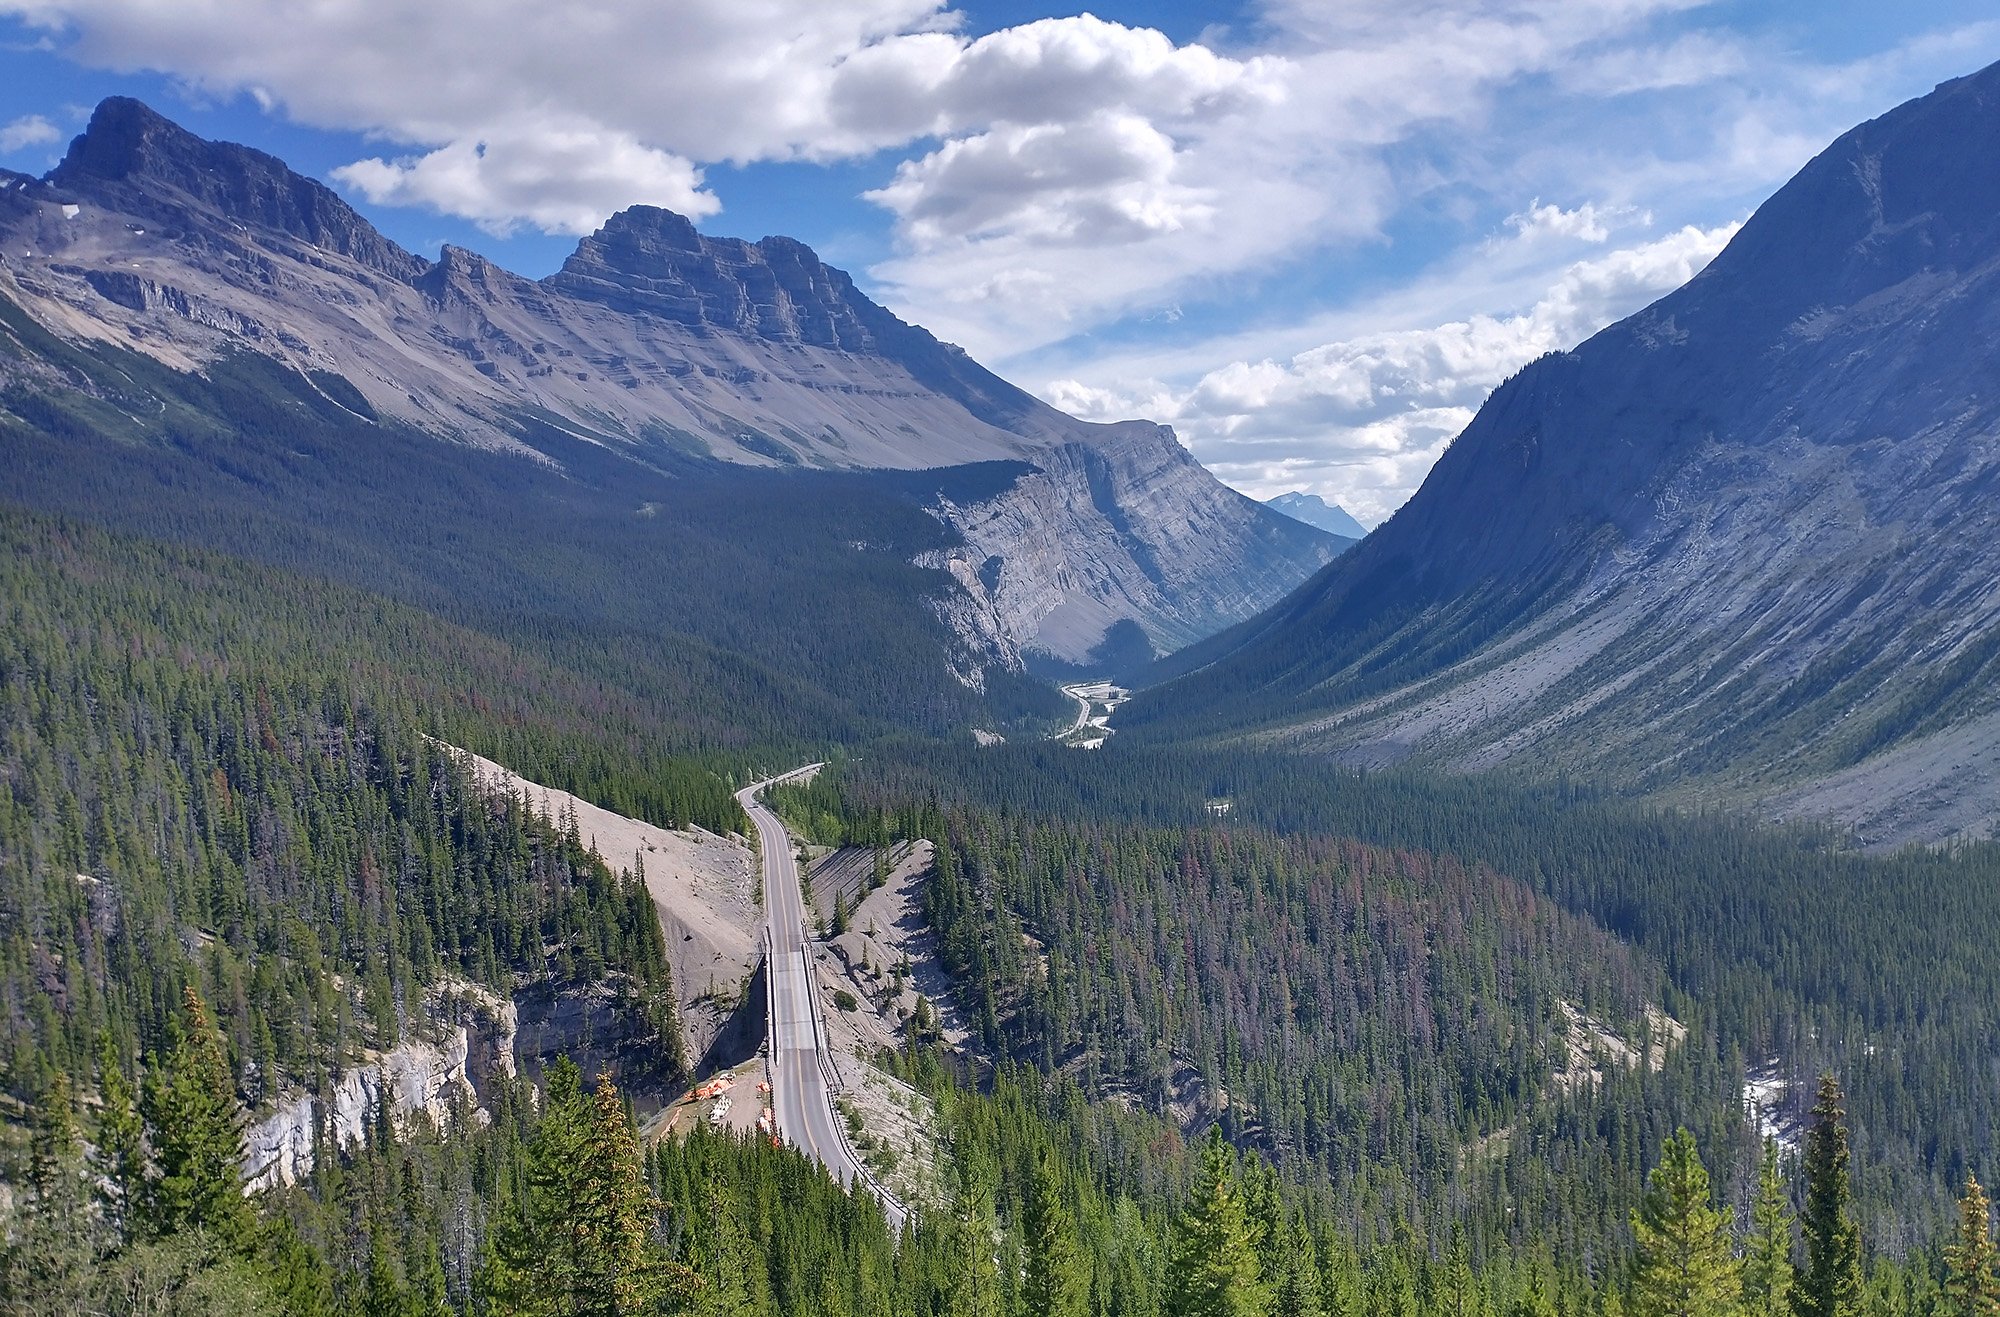 The icefield parkway is at around 1900m elevation. From there you gradually go down to 1400m.